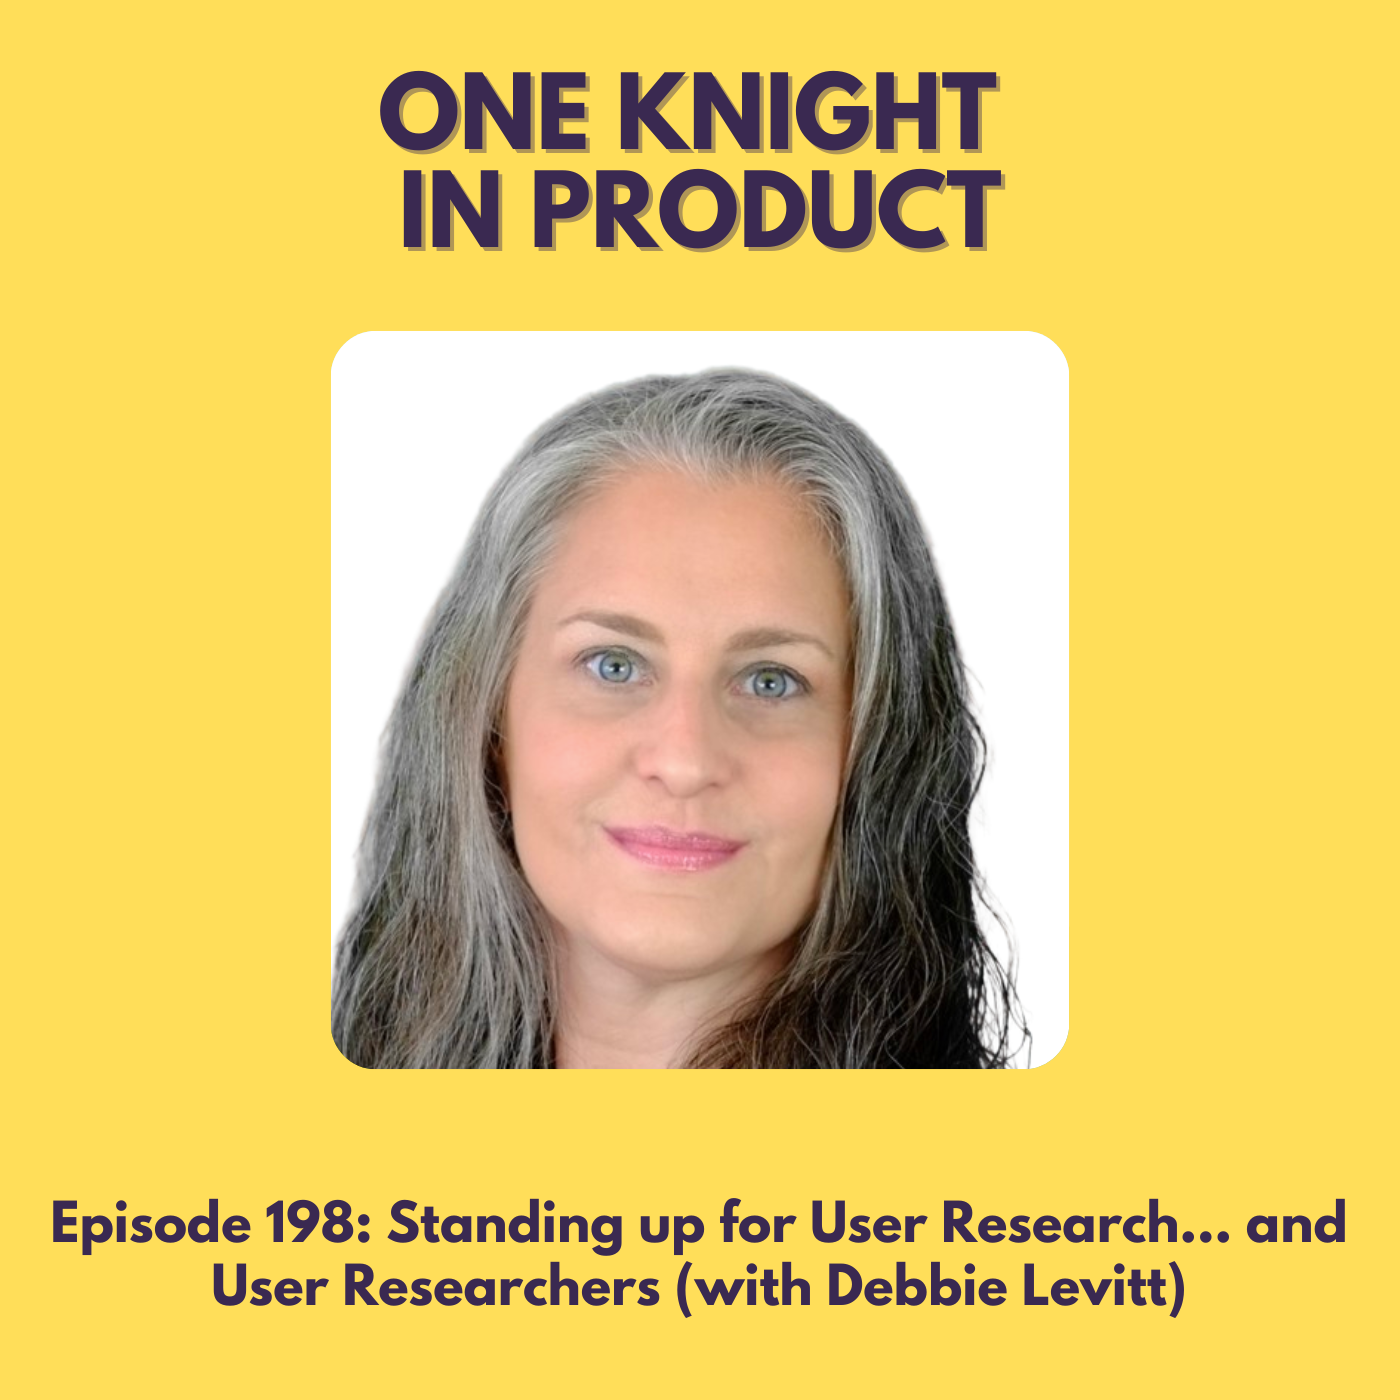 Standing up for User Research... and User Researchers (with Debbie Levitt, CXO @ DeltaCX and Author 